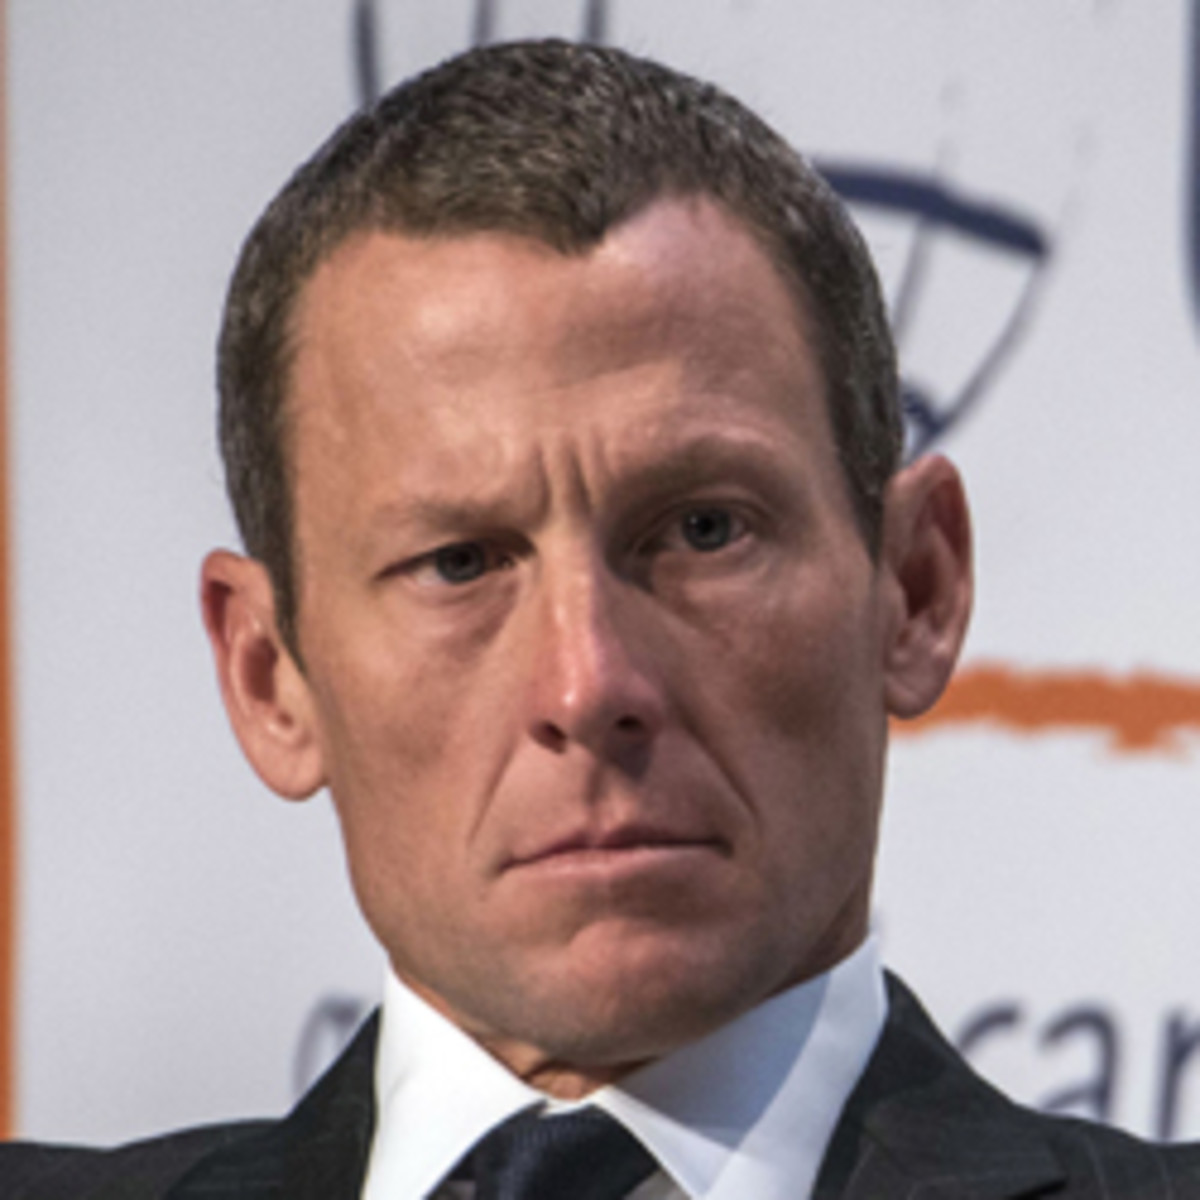 The Justice Department is reportedly weighing whether to enter a federal whistleblower suit against Lance Armstrong. (AFP/Getty Images)